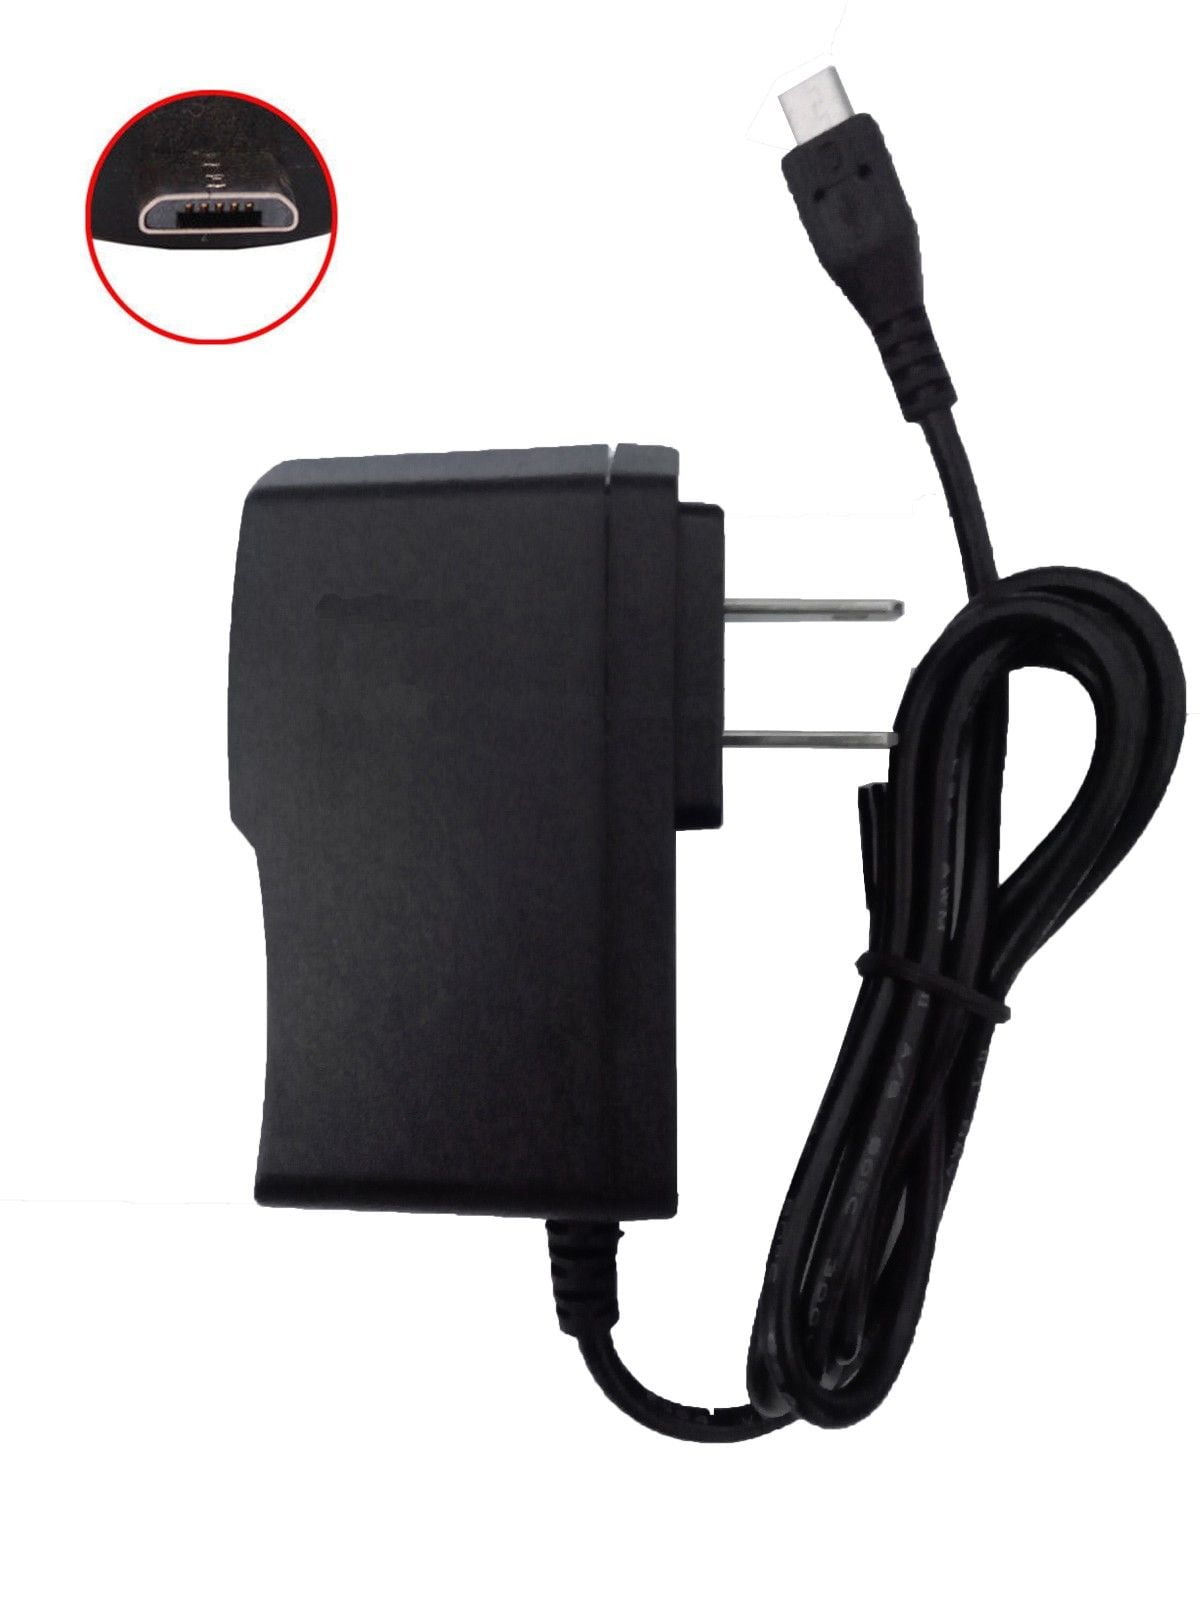 AC Adapter Charger For Amazon Kindle Fire HD 10 10.1 Tablet DC Power Supply Cord 